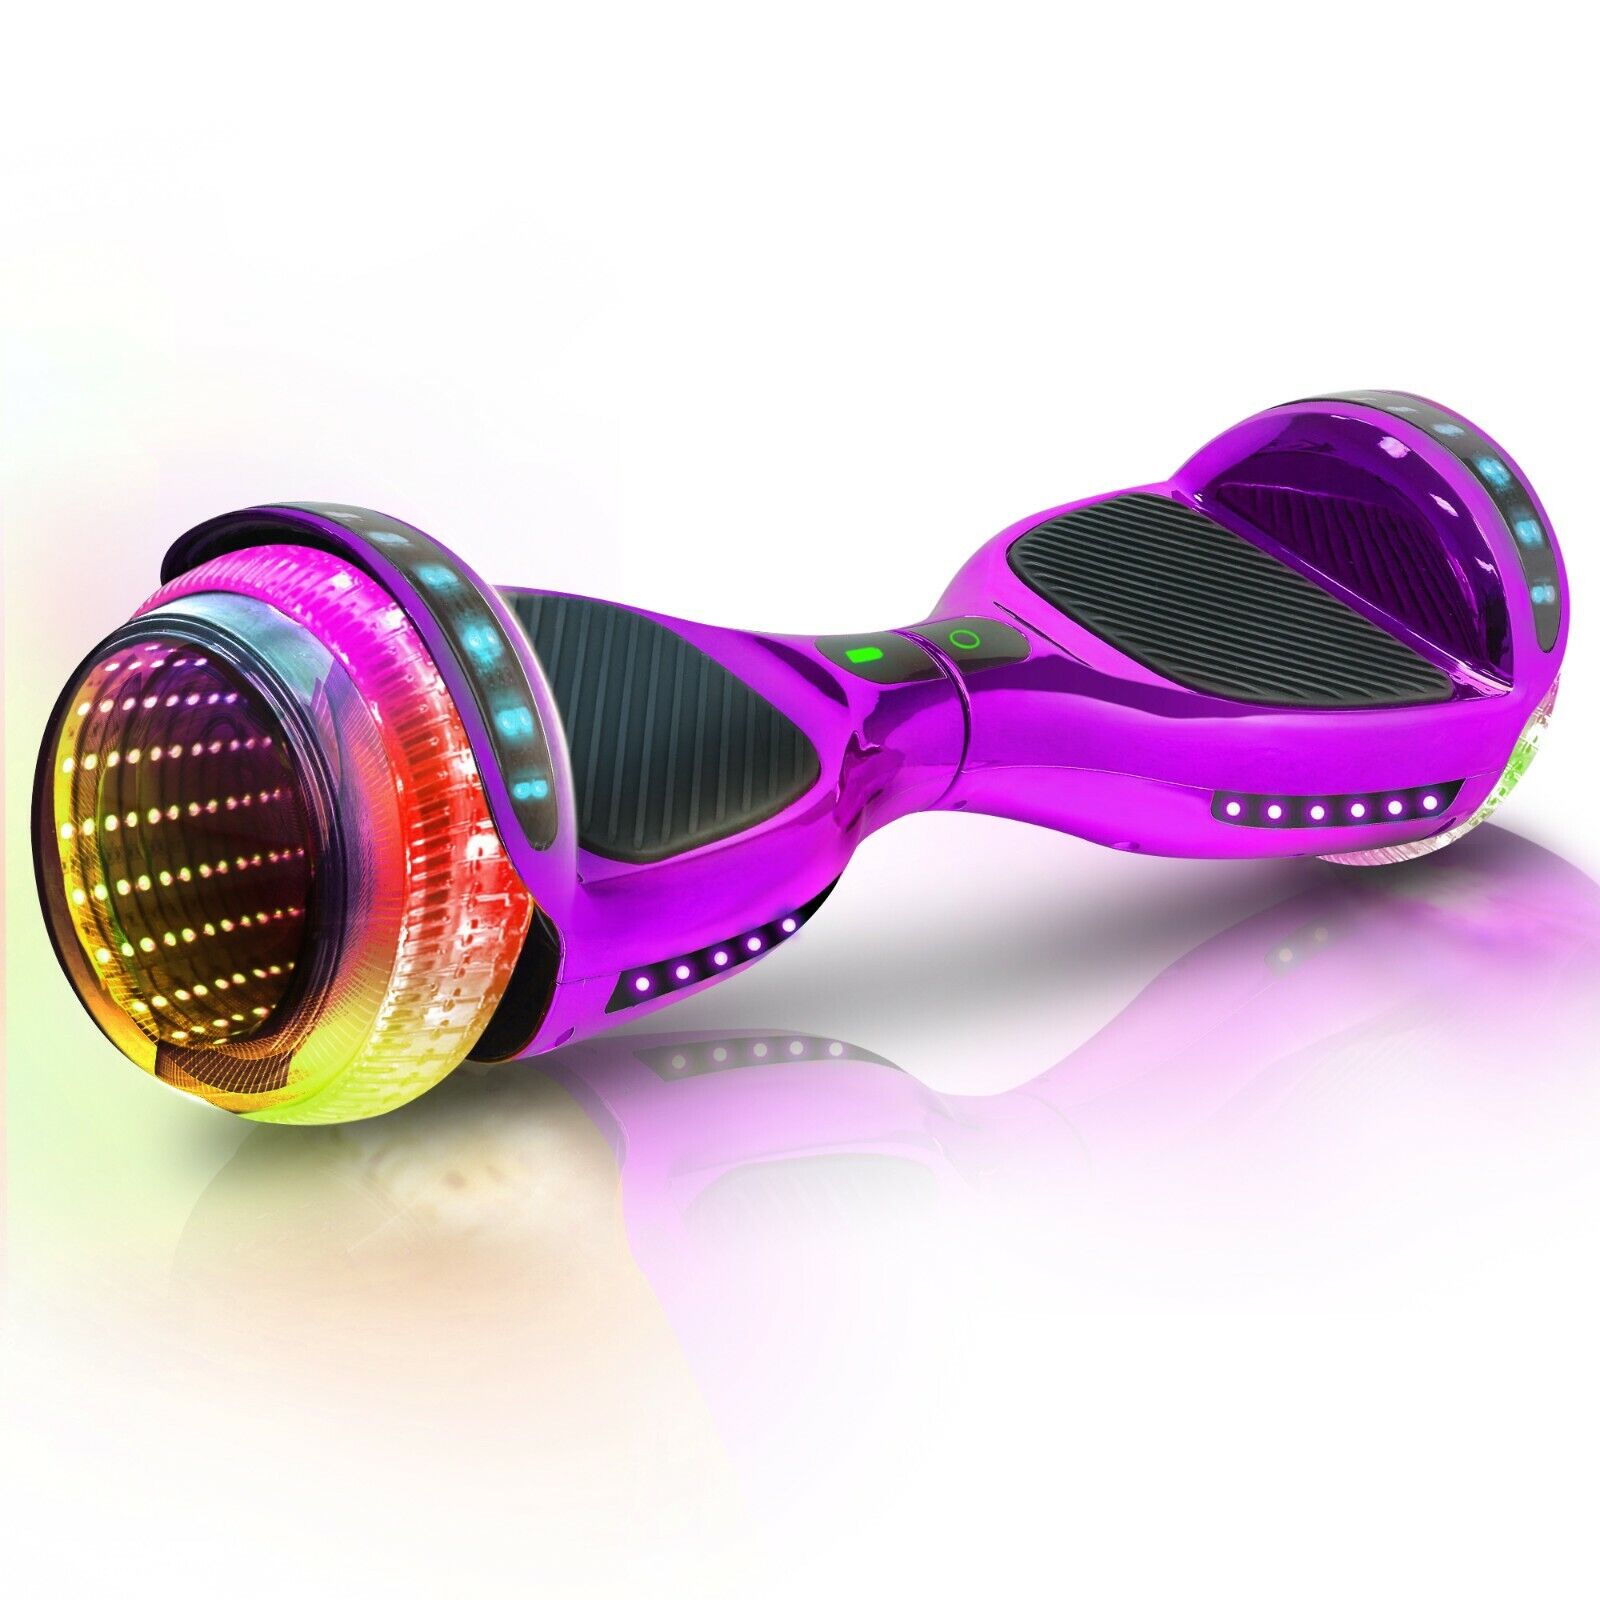 Self Balancing Scooter With Led Lights - Ul2272 Certified